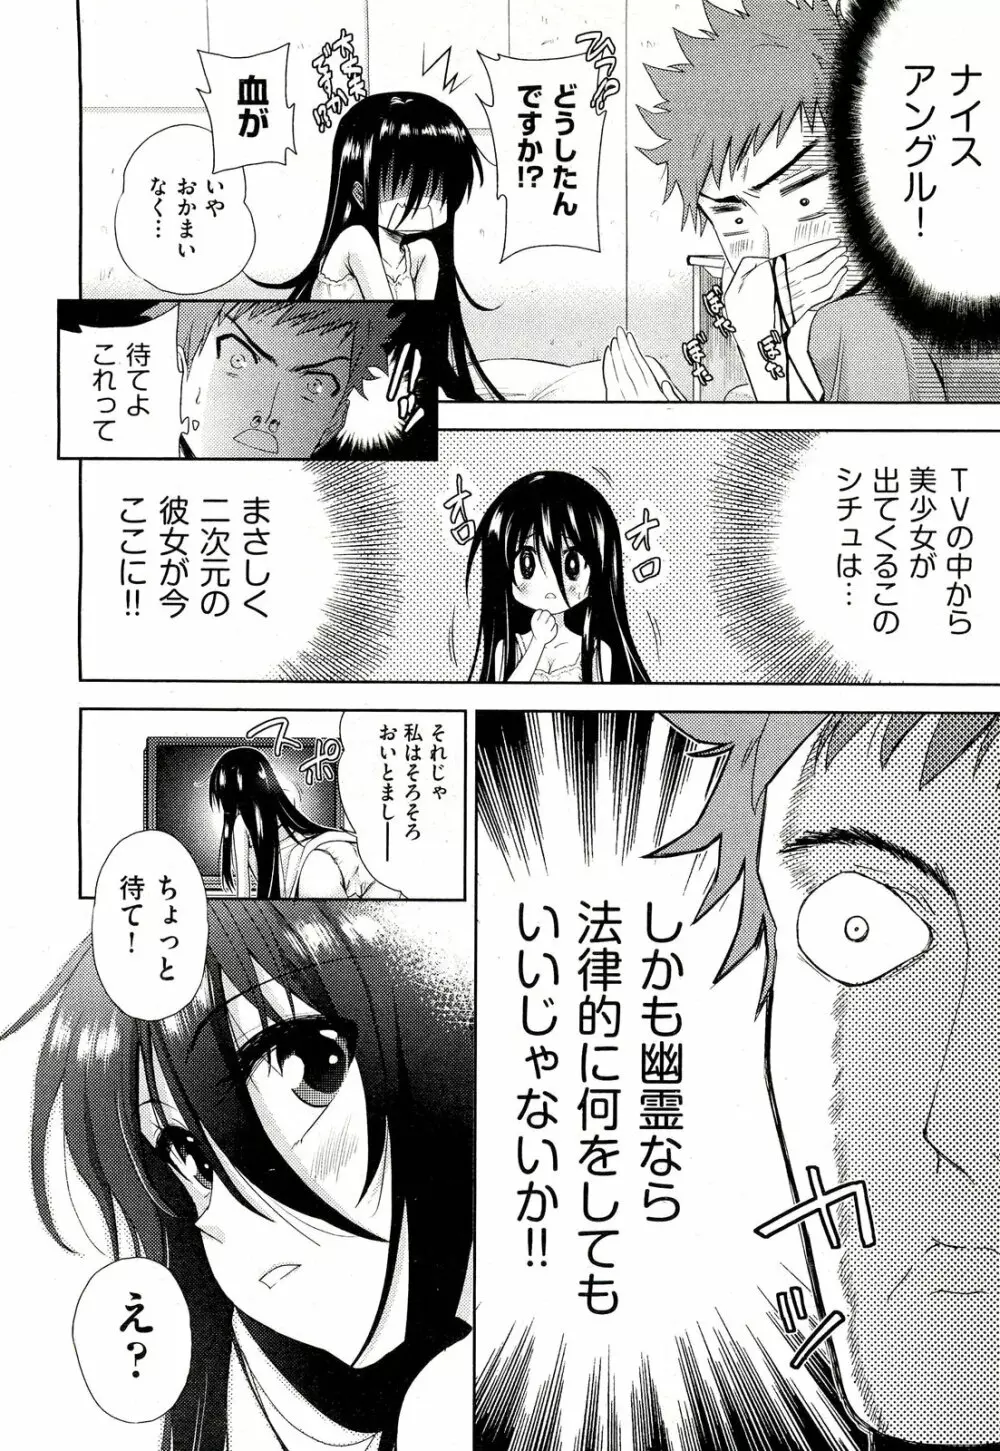 Two dimensions girlfriend Ch.1-4 6ページ